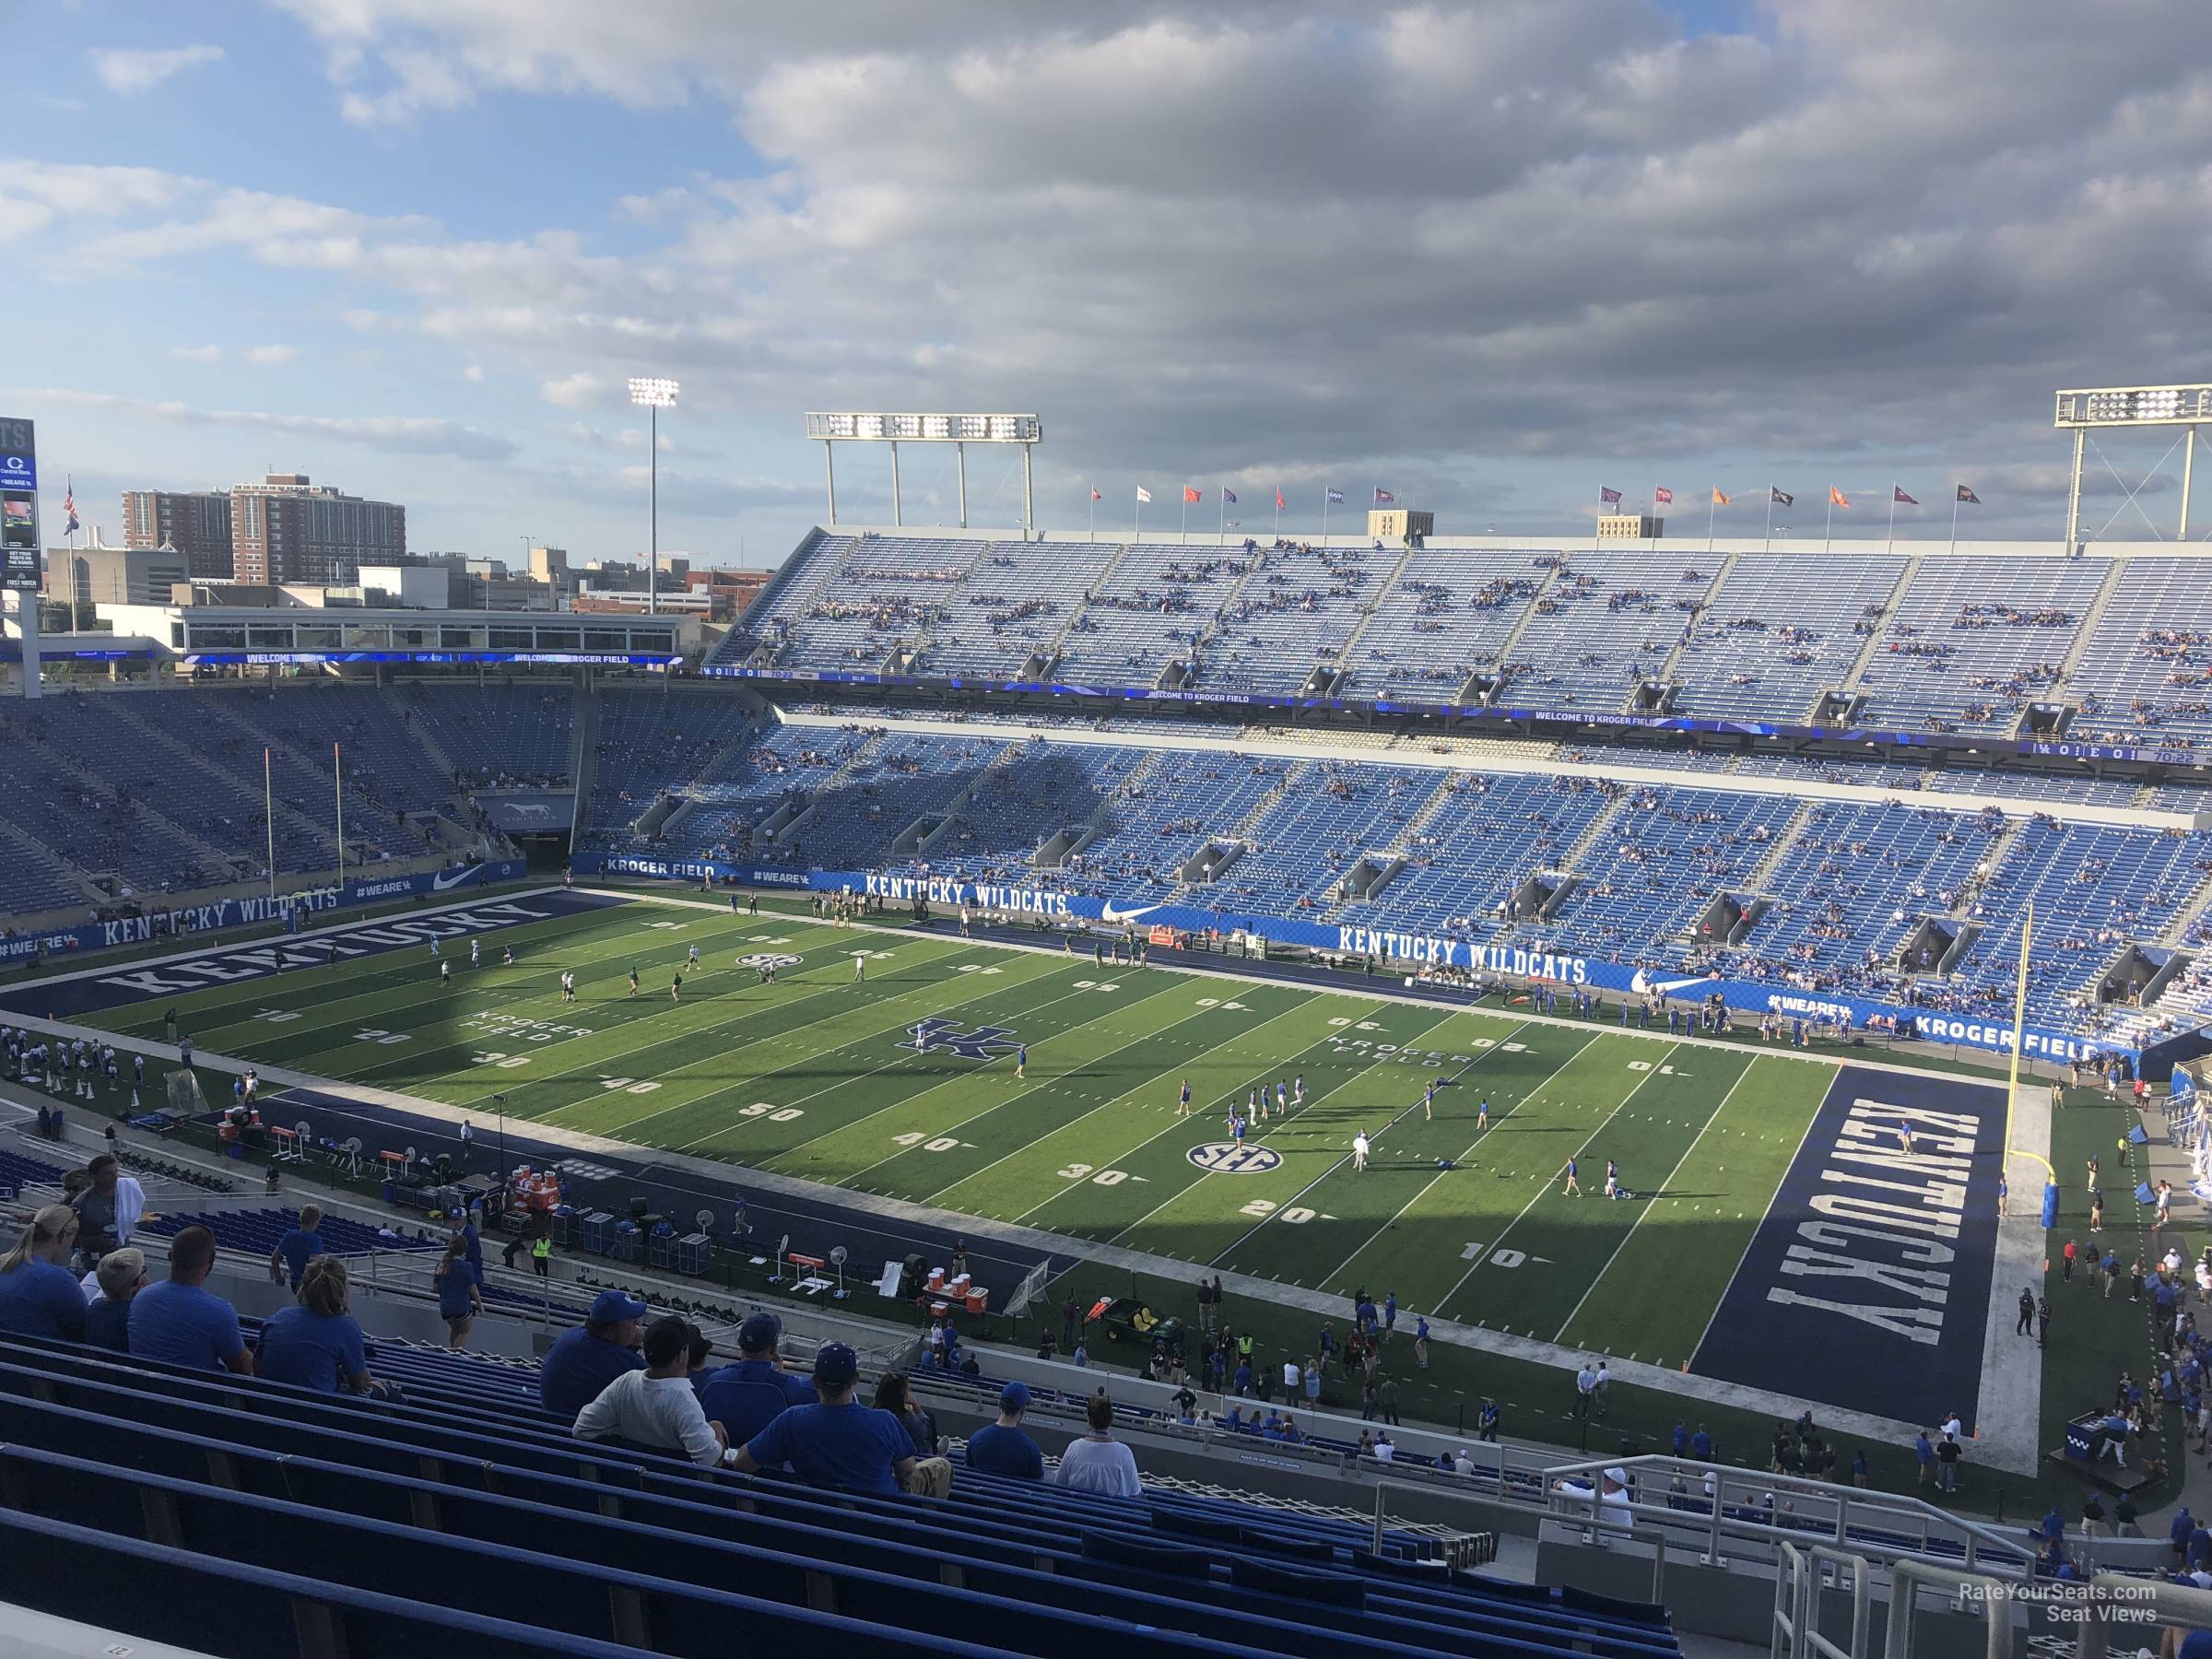 Section 229 at Kroger Field